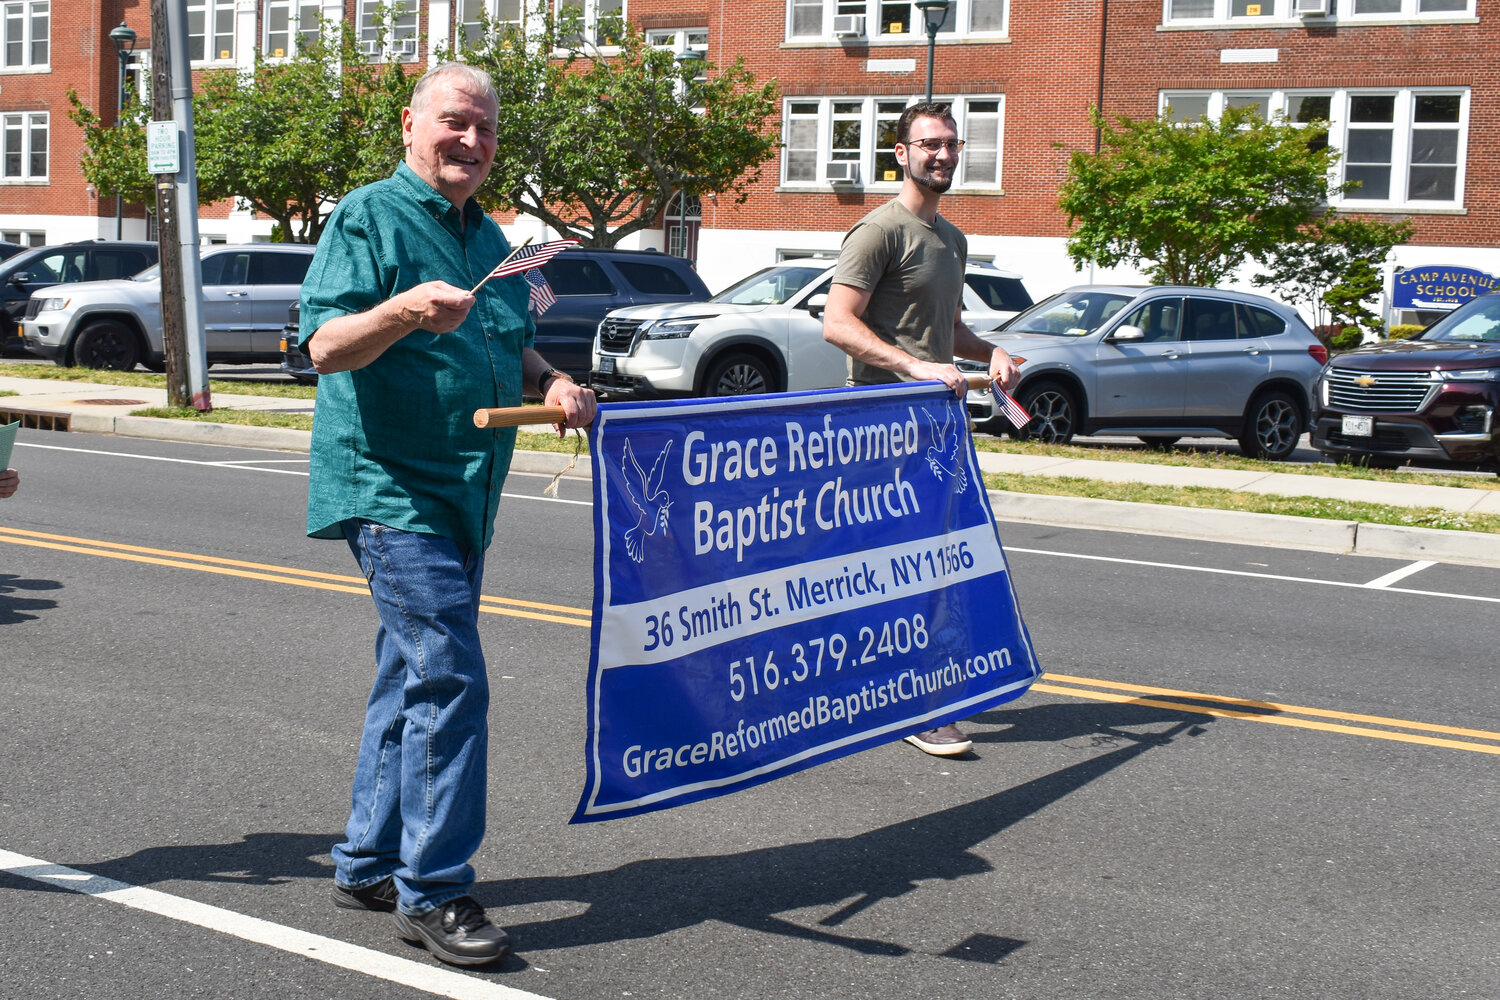 Several additional community organizations, such as the Grace Reformed Baptist Church, also took part in the parade. Left, Paul Wilkin and Brandon Fredericks, representing the church.